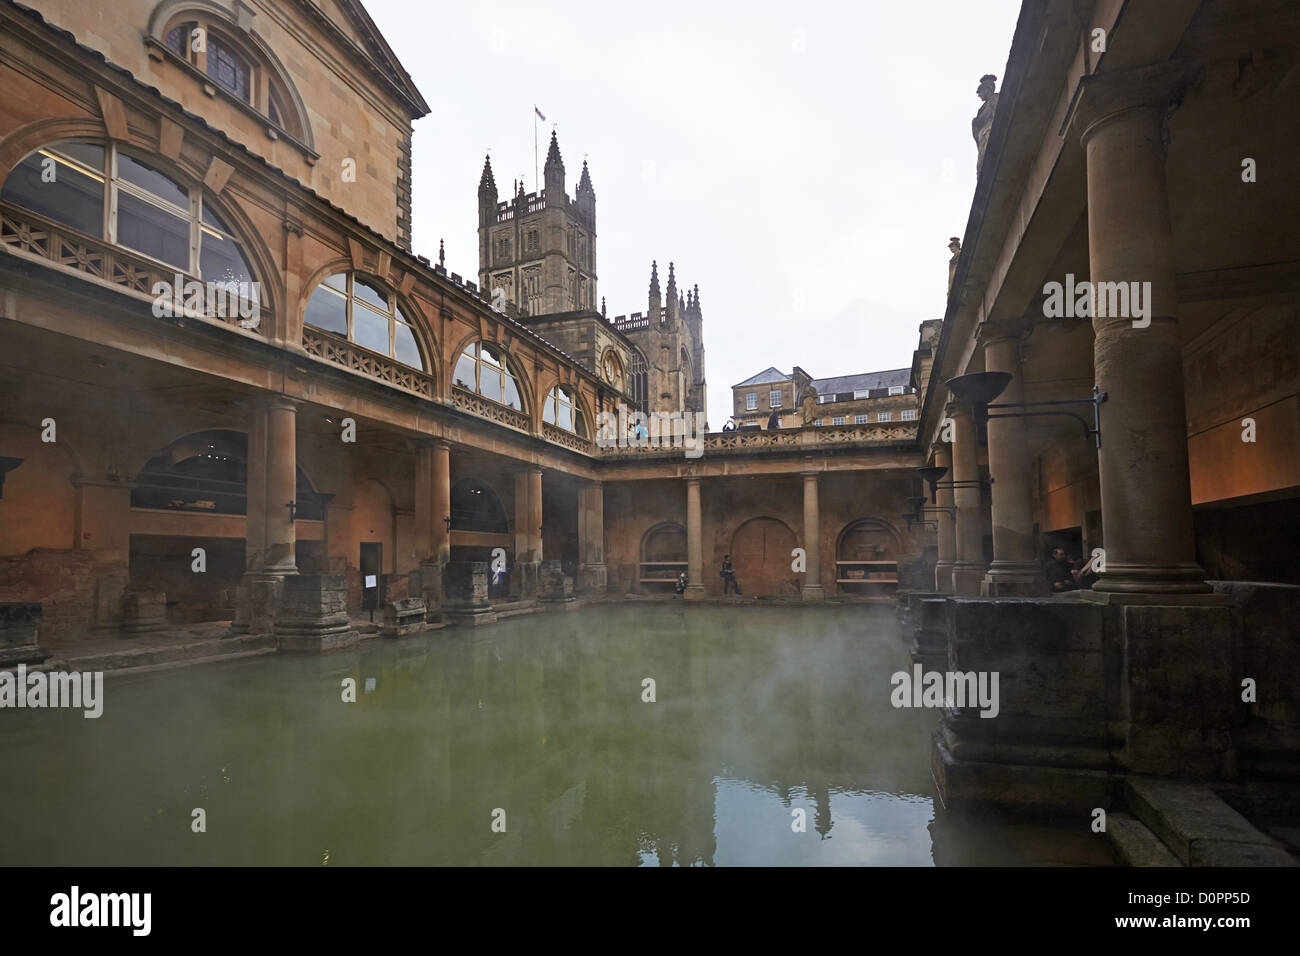 Bath Roman baths and a view of The Great Bath with Bath Abbey behind Stock Photo